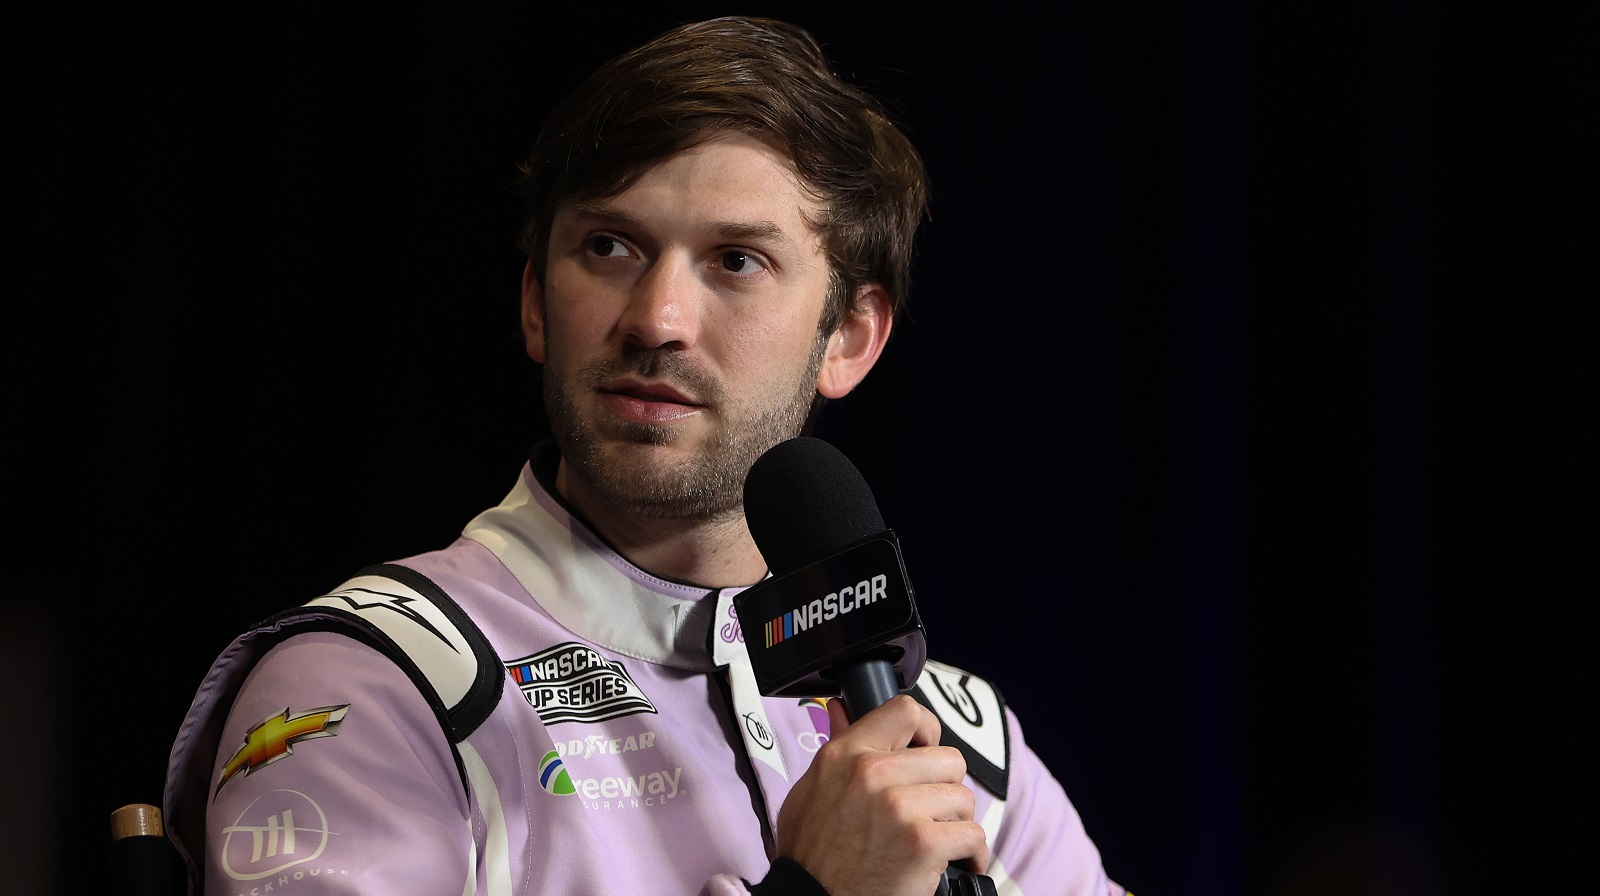 Daniel Suarez Is Shaping up as Brad Keselowski’s Worst Nightmare After the NASCAR Penalty